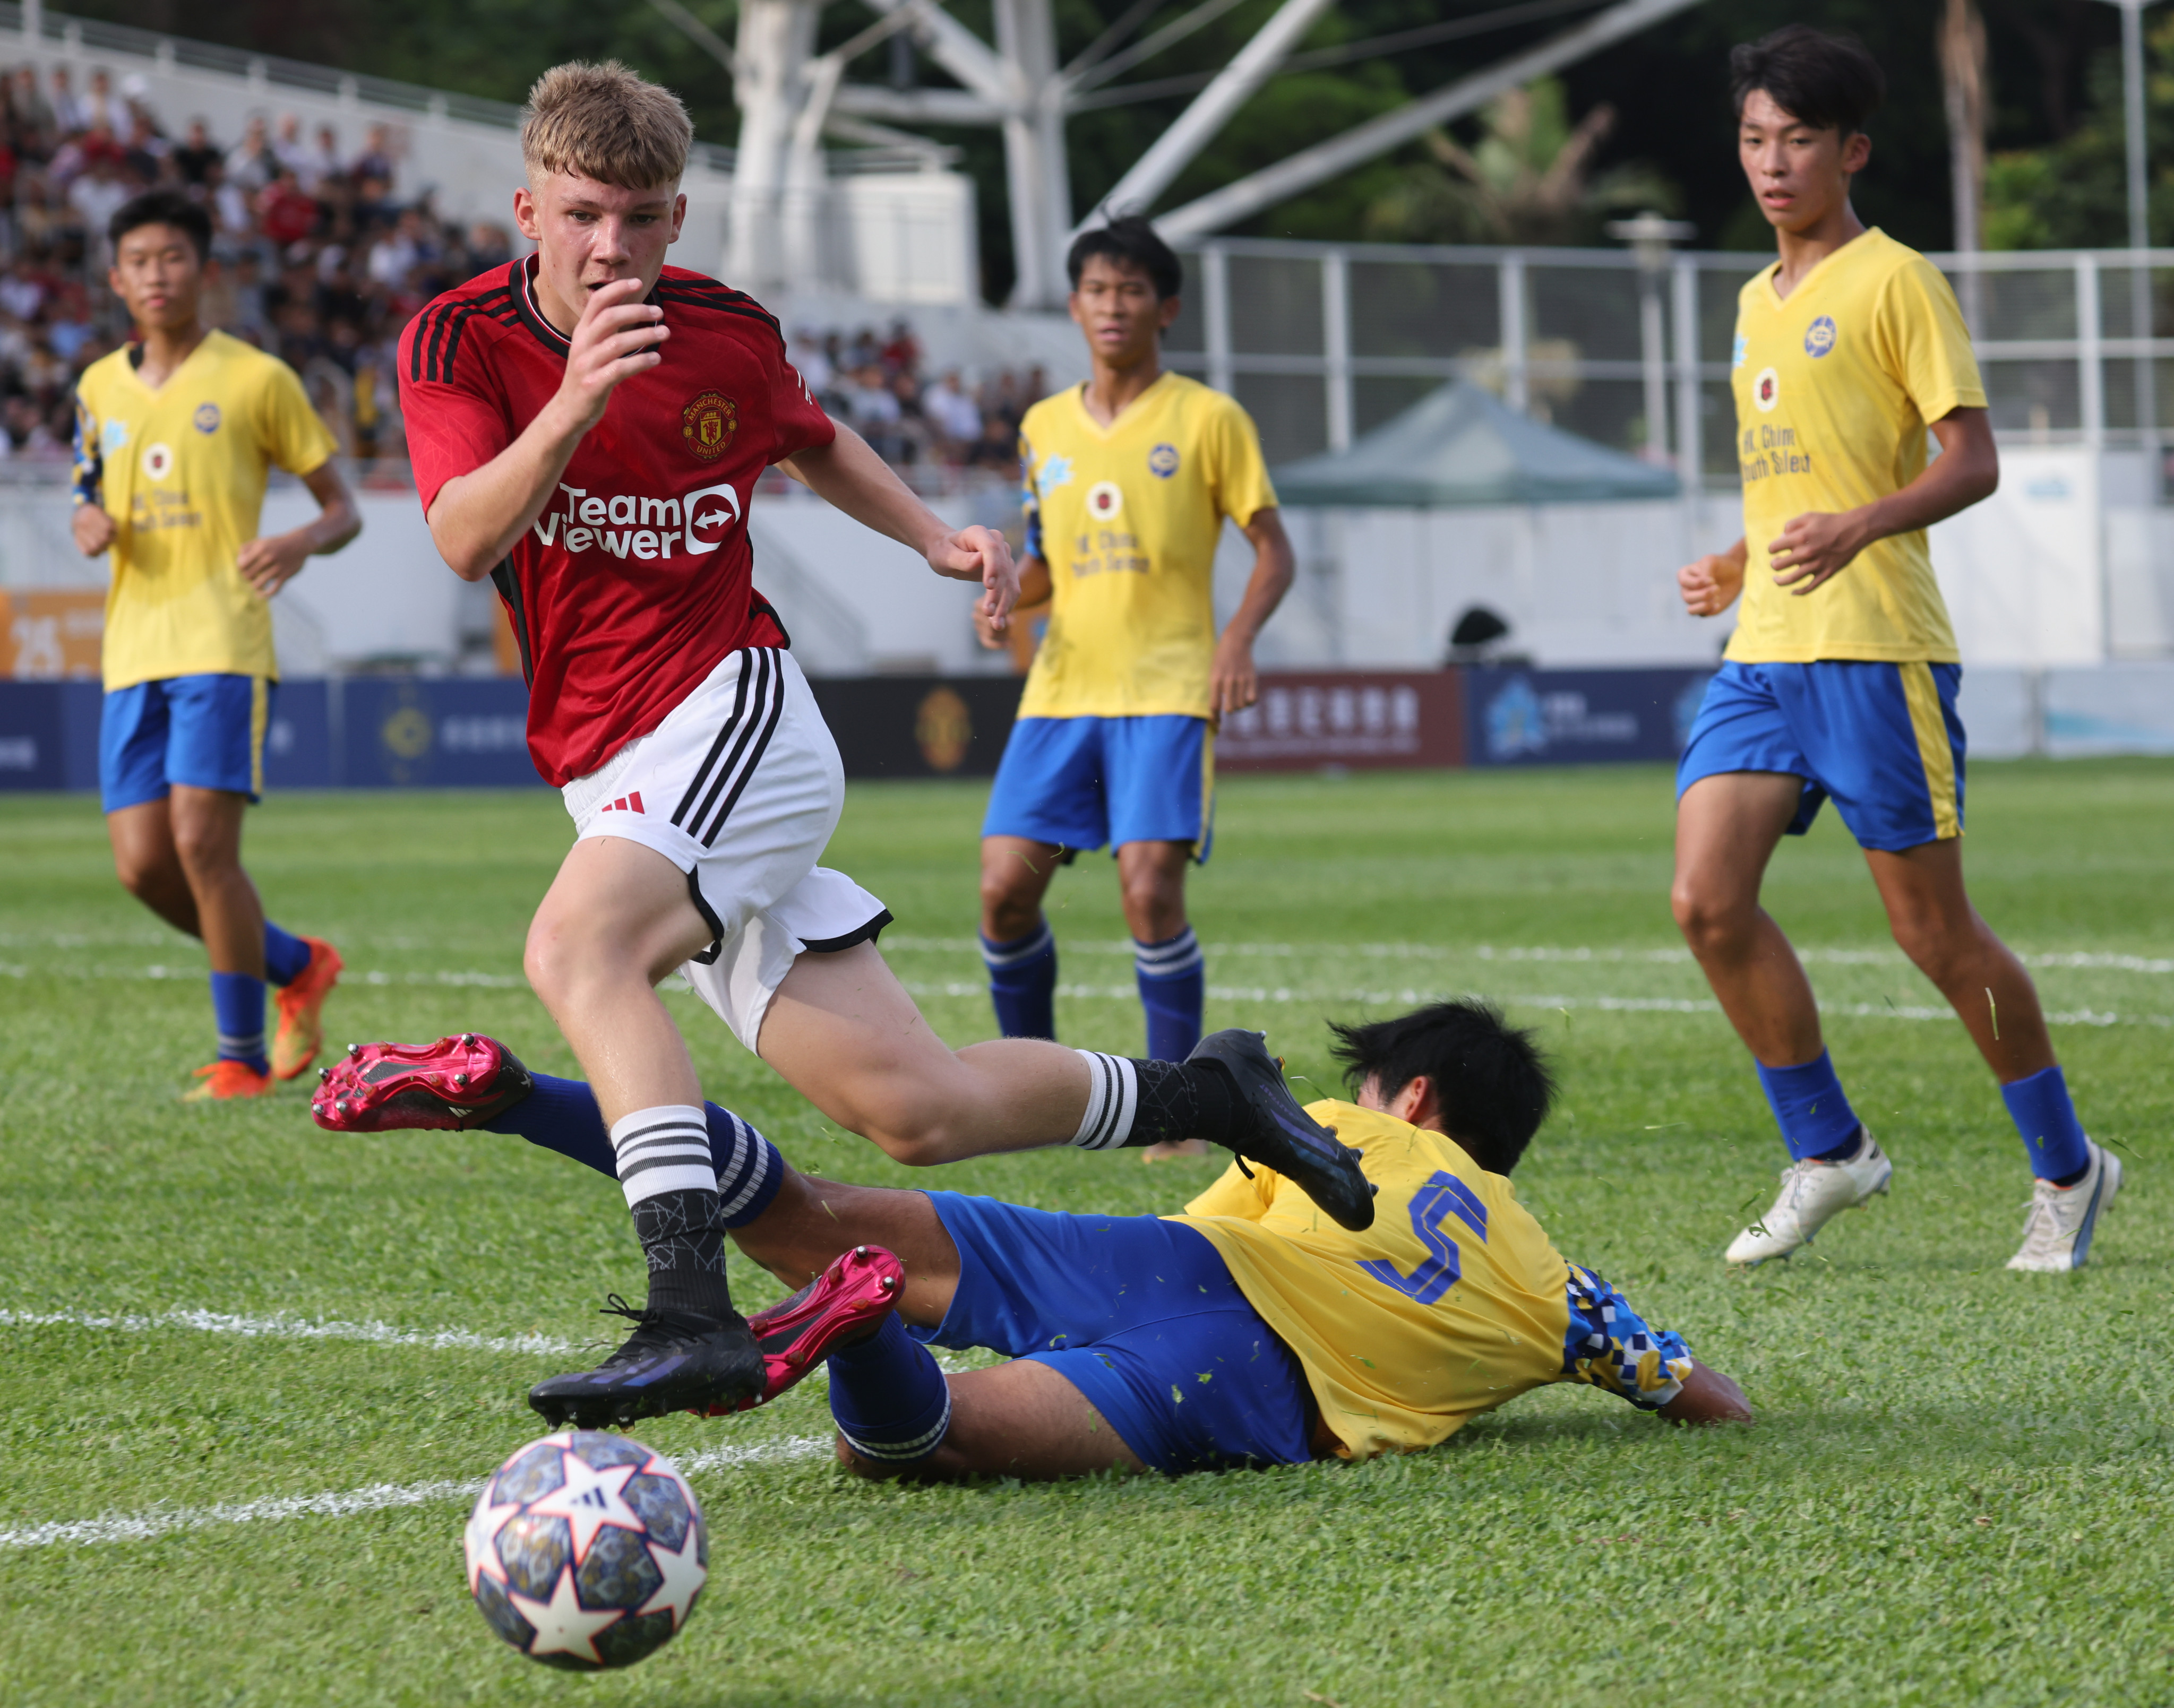 Manchester United U16s played two matches in front of enthusiastic fans at Mong Kok Stadium. Photo: Yik Yeung-man